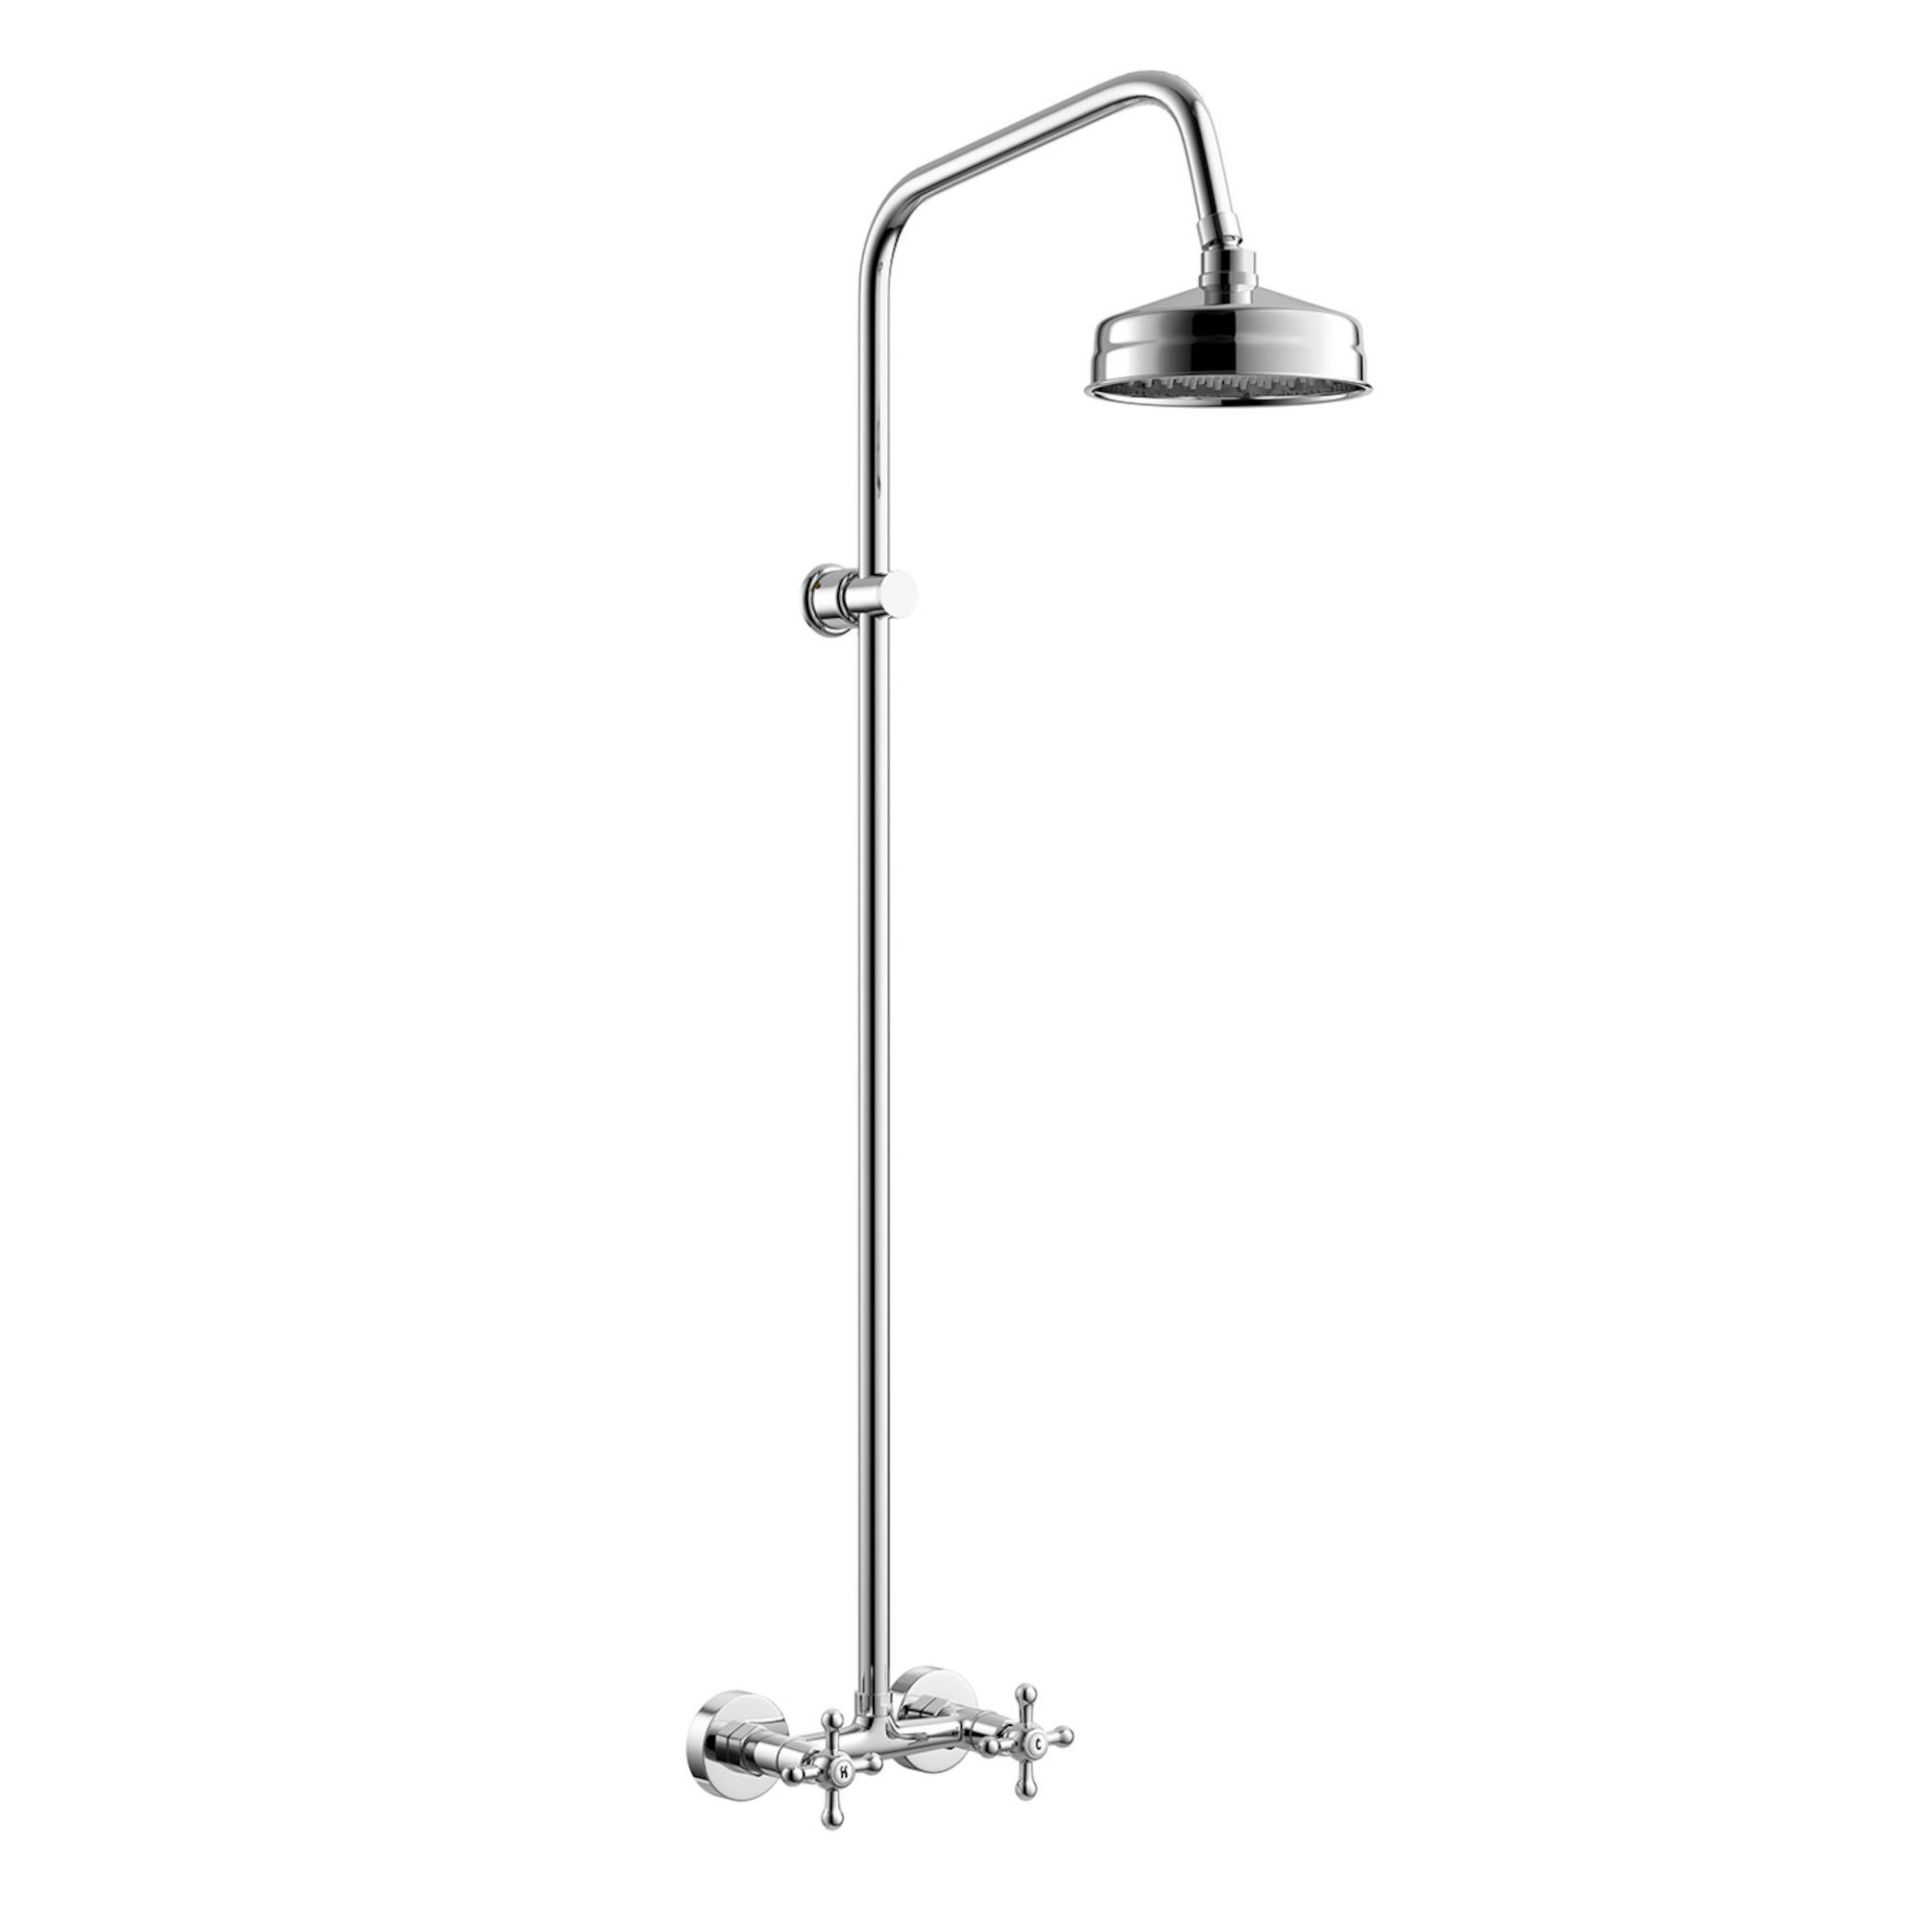 (TP109) Traditional Exposed Shower & Medium Head Exposed design makes for a statement piece Stunning - Image 2 of 3